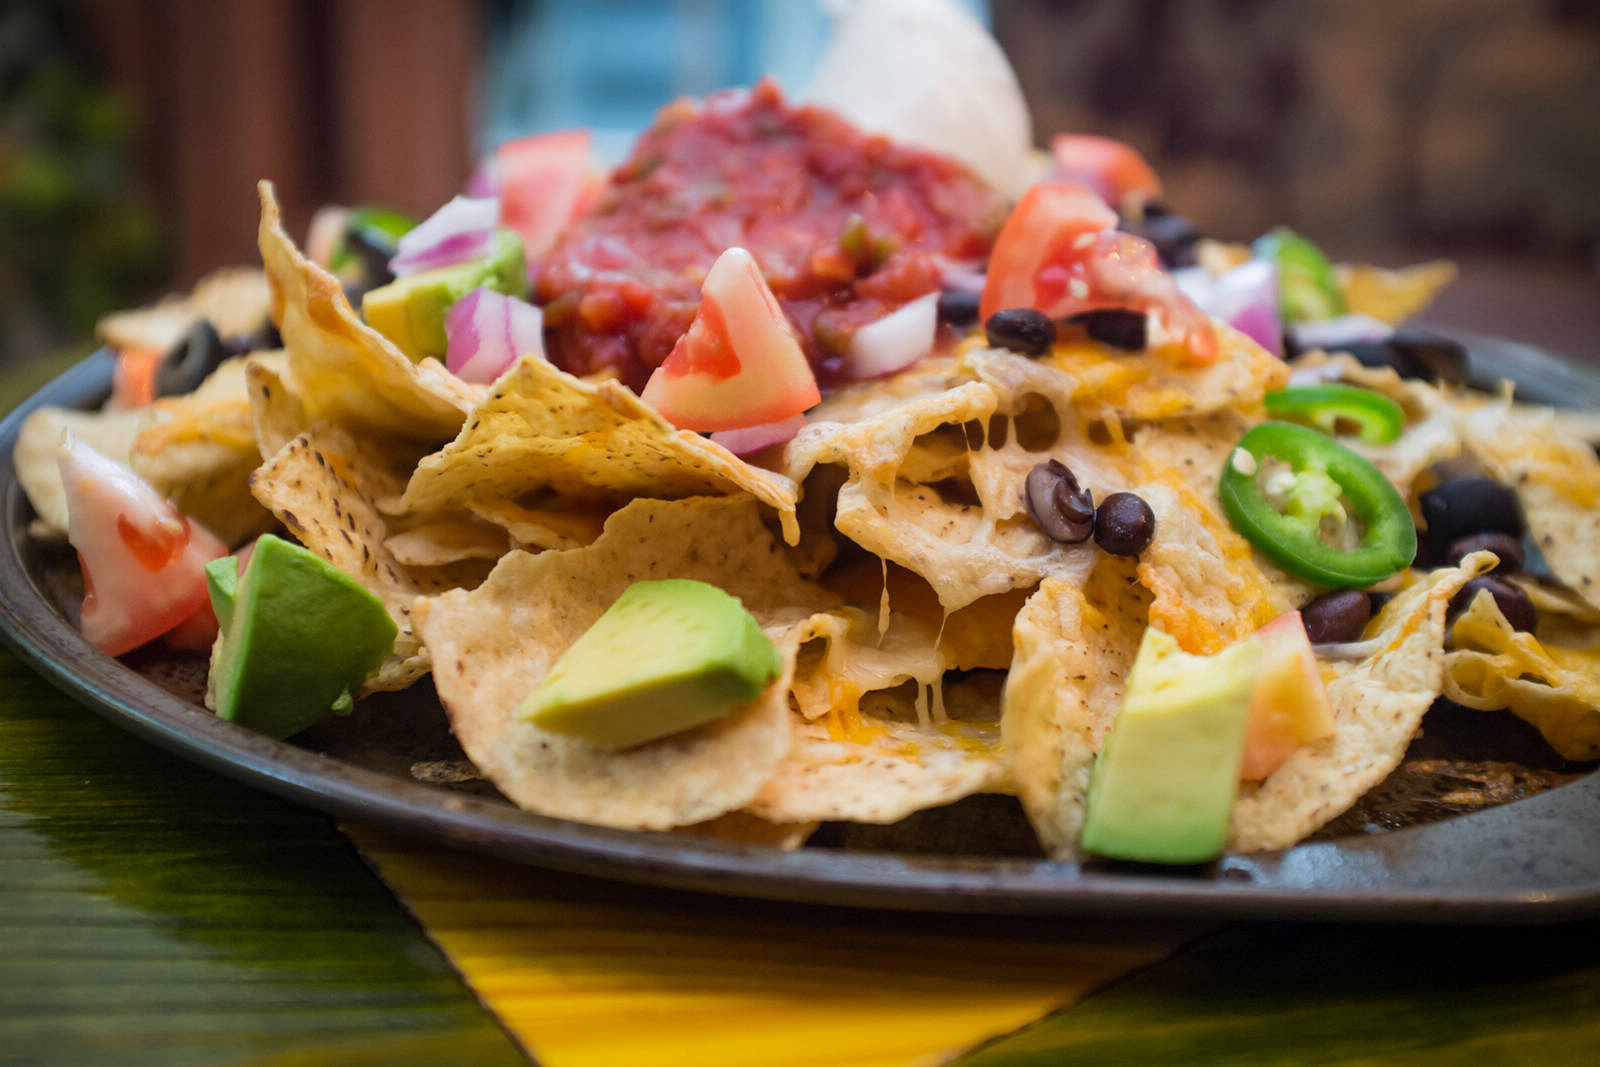 A hearty plate of nachos 